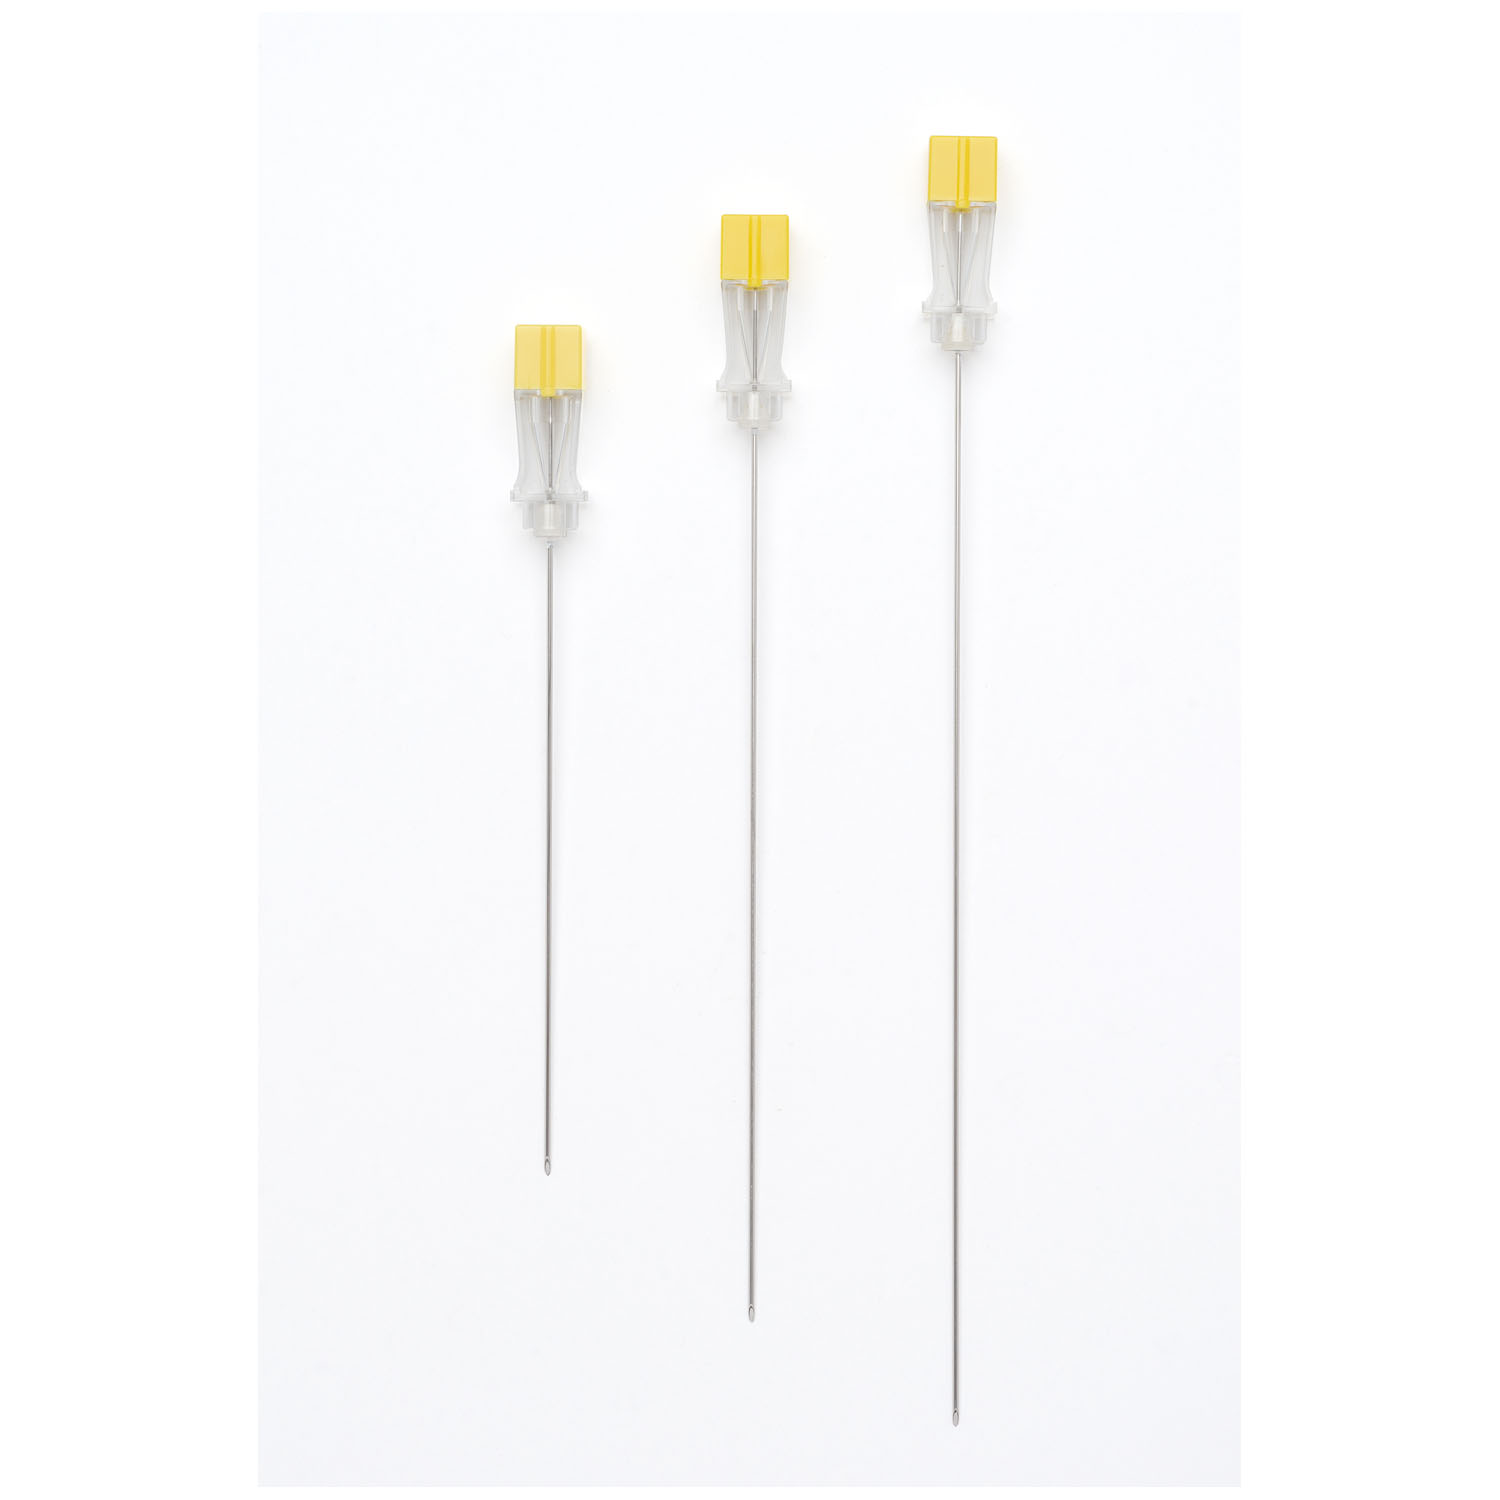 MYCO RELI QUINCKE POINT SPINAL NEEDLES : SN20G601 BX           $112.45 Stocked